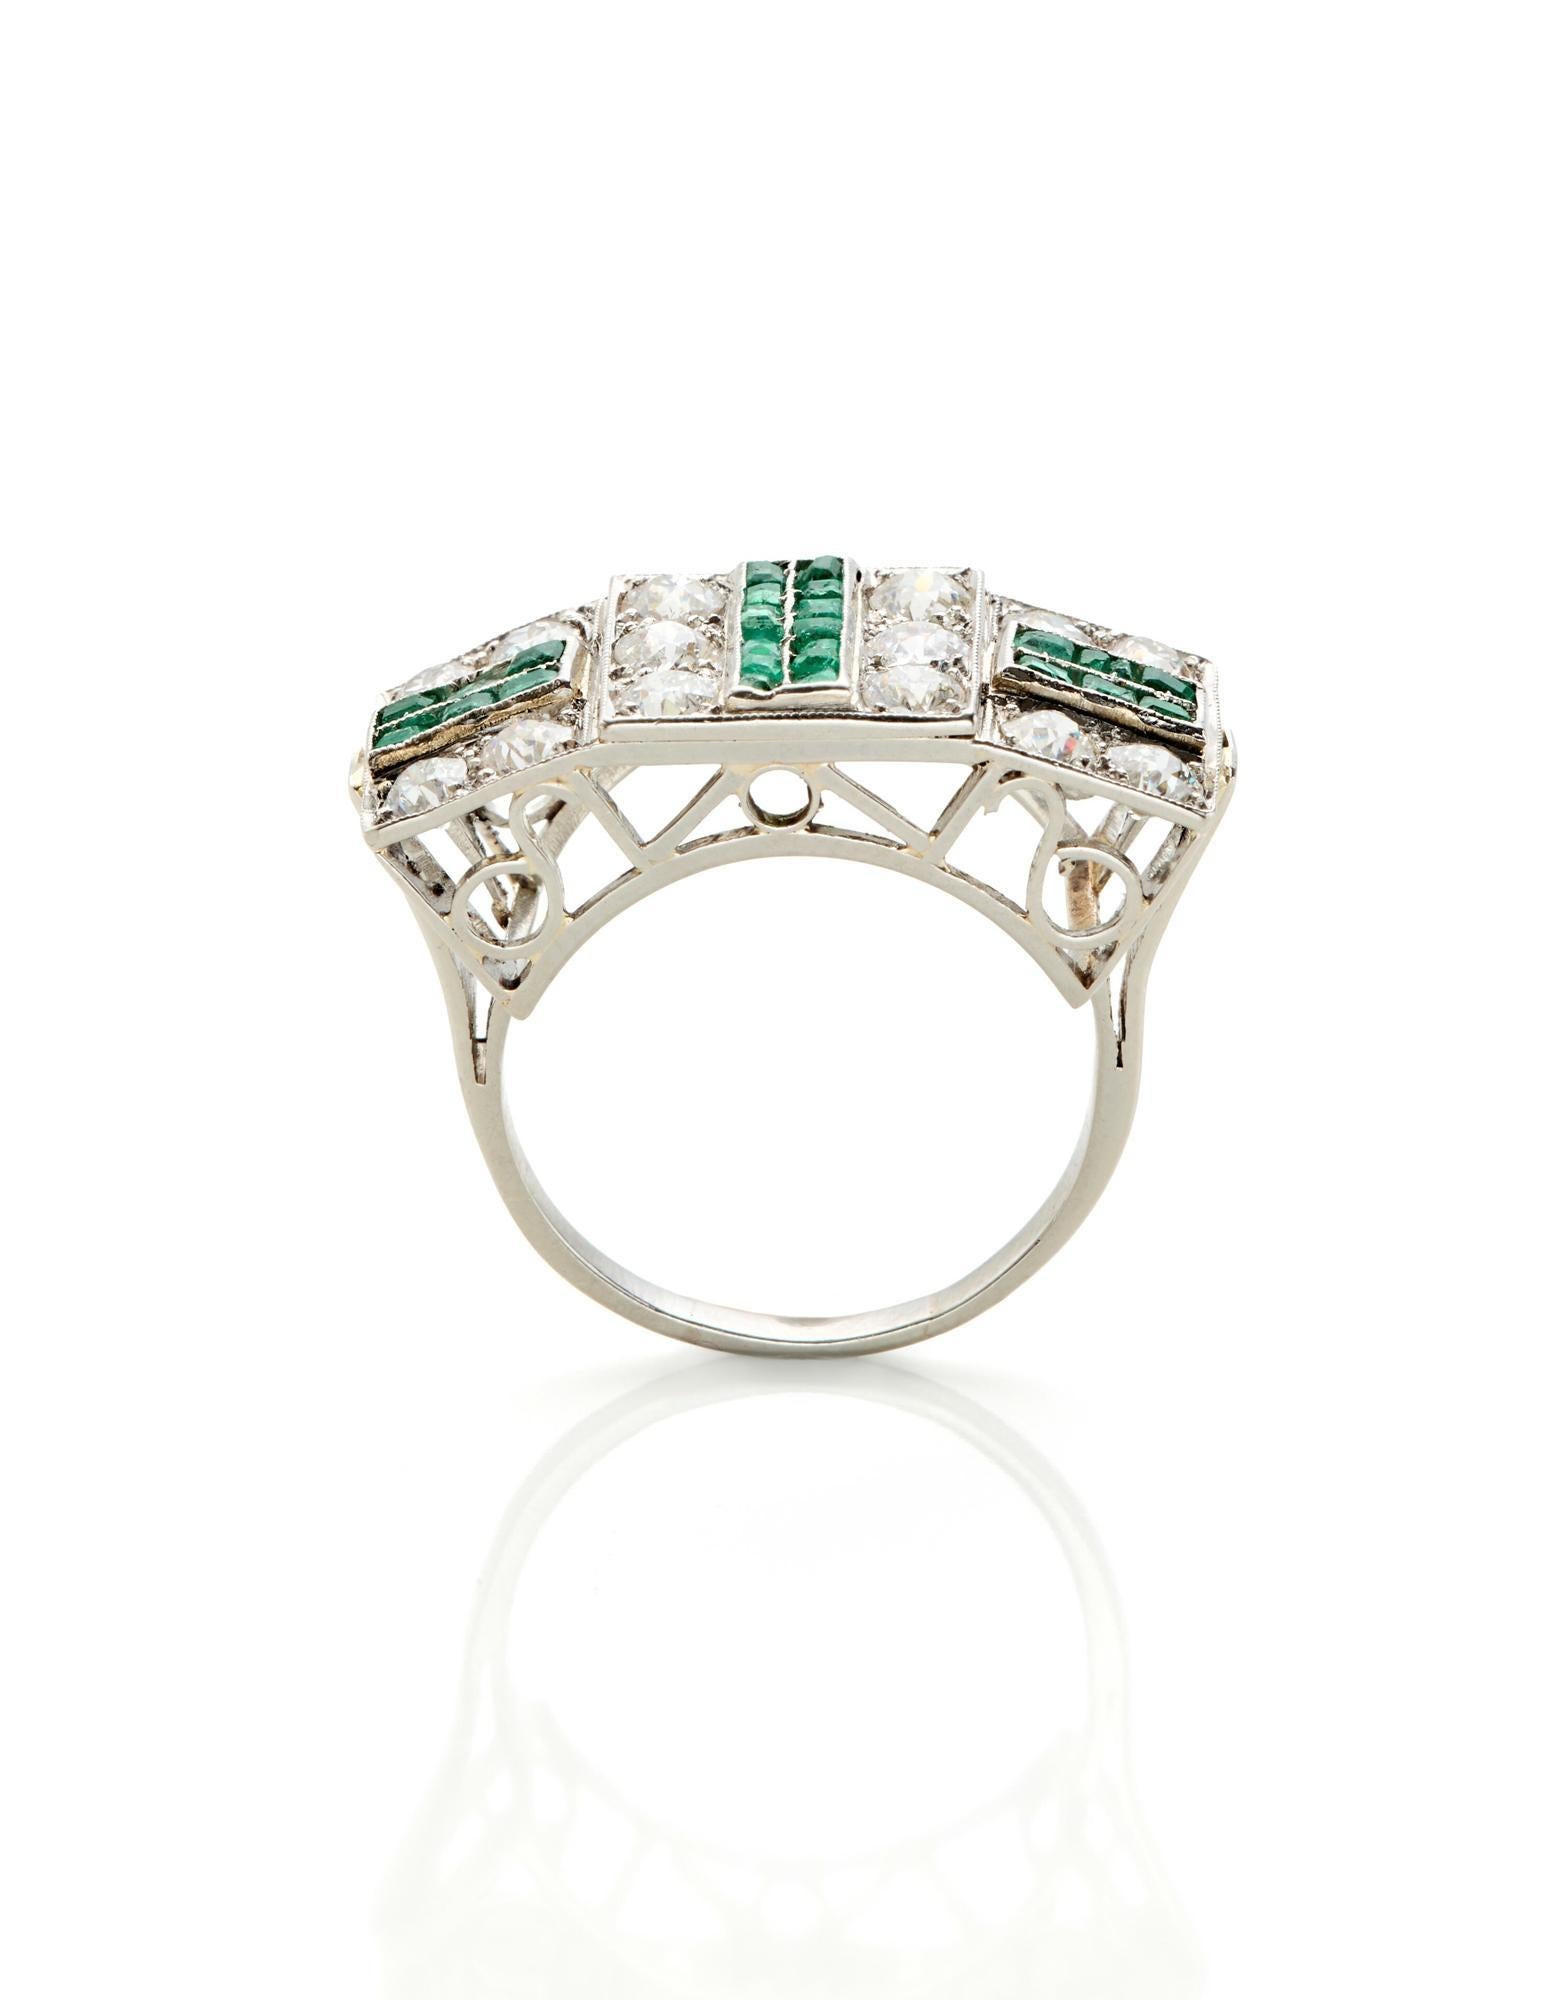 Women's Art deco style ring adorned with 14 pavè set old mine diamonds. For Sale